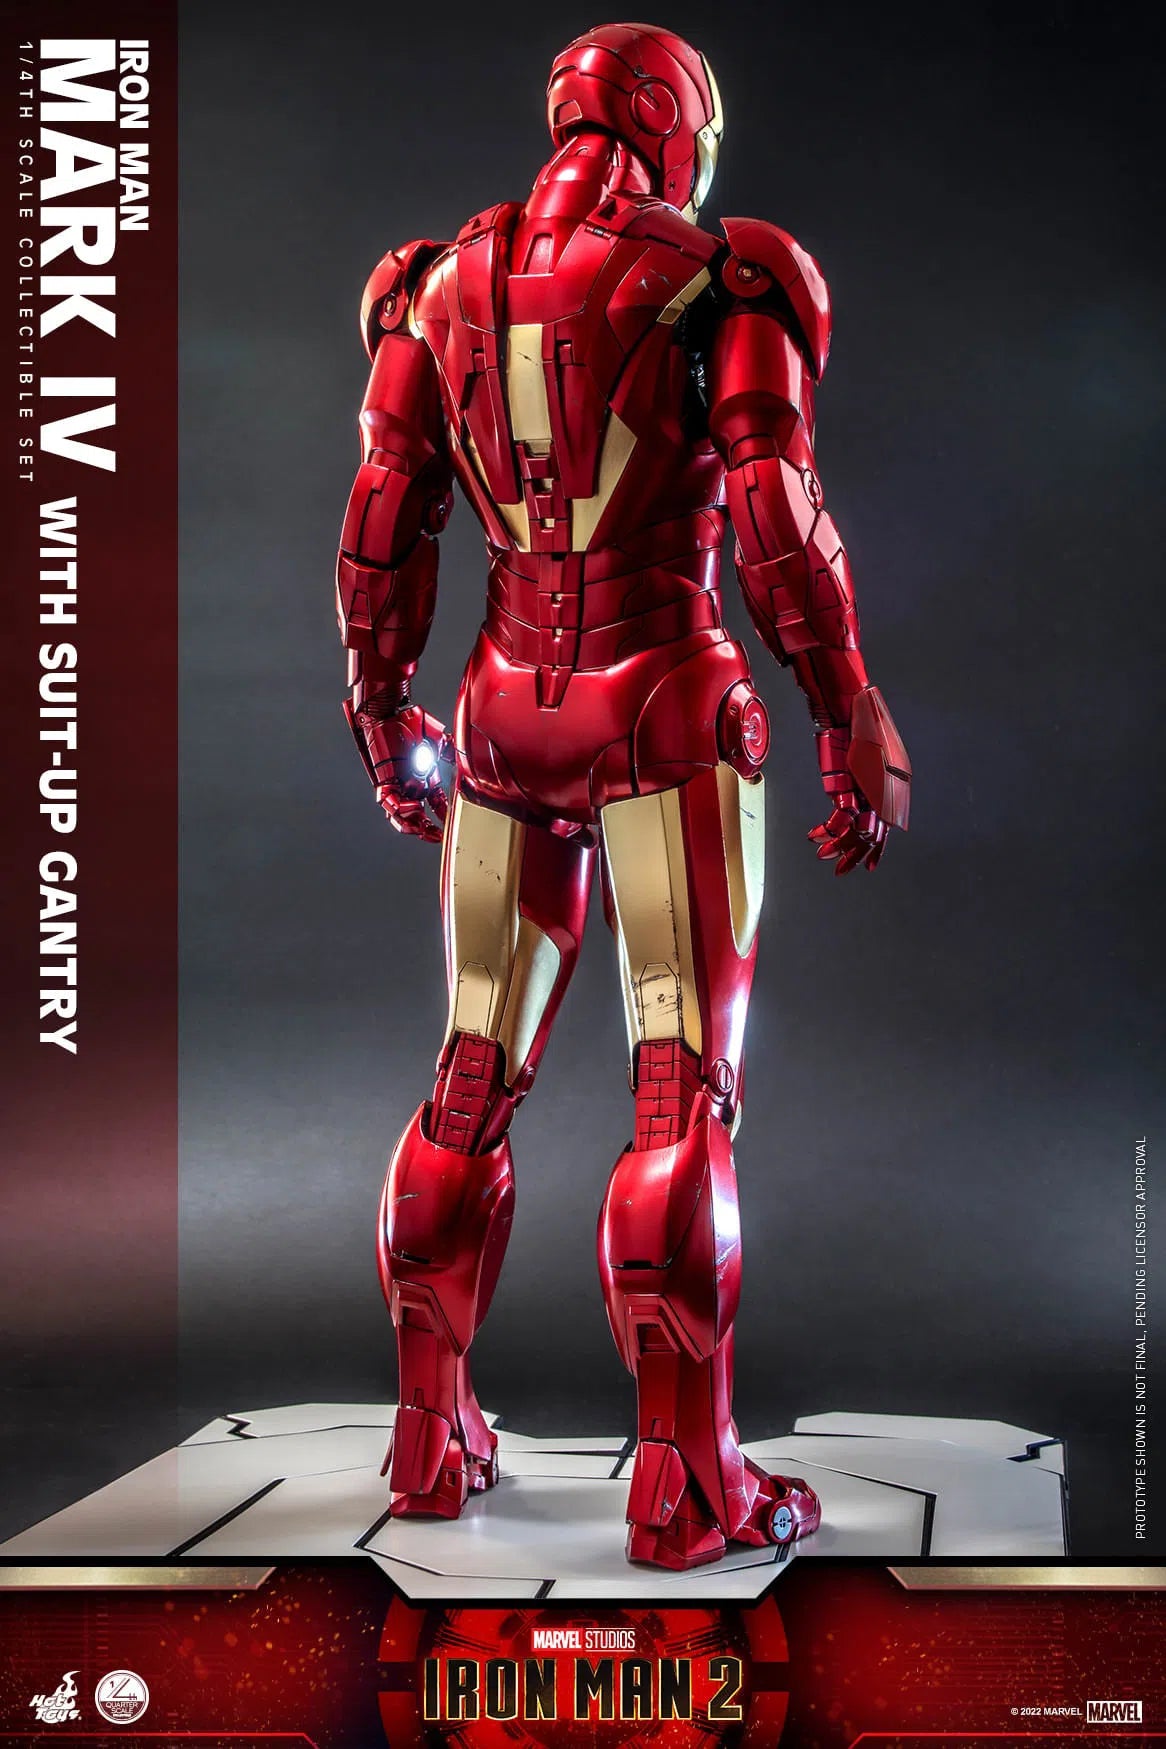 Iron Man: MKIV With Suit Up Gantry: Iron Man 2: Marvel: Quarter Scale: QS021: Hot Toys